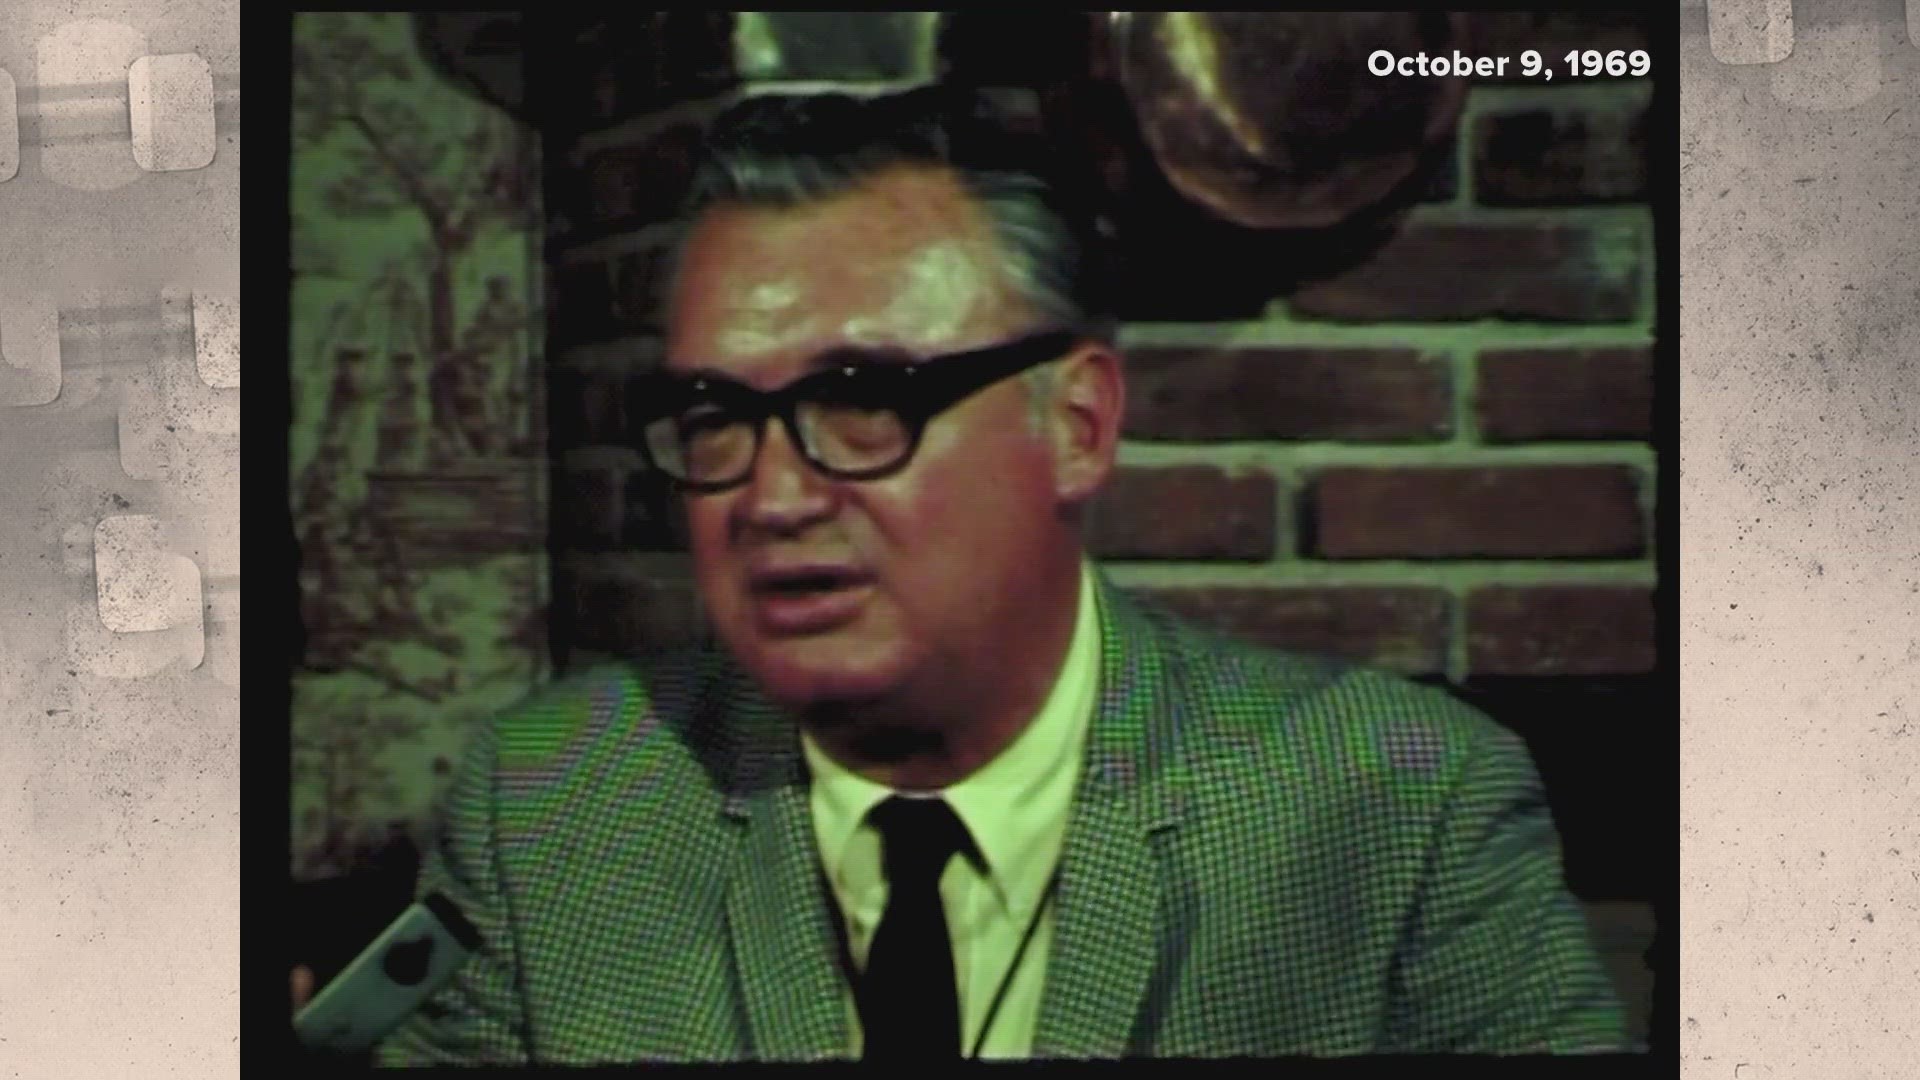 In 1969, iconic Cardinals broadcaster Harry Caray was fired by Anheuser-Busch after 25 years of calling games for the team. Caray was notified by a phone call.